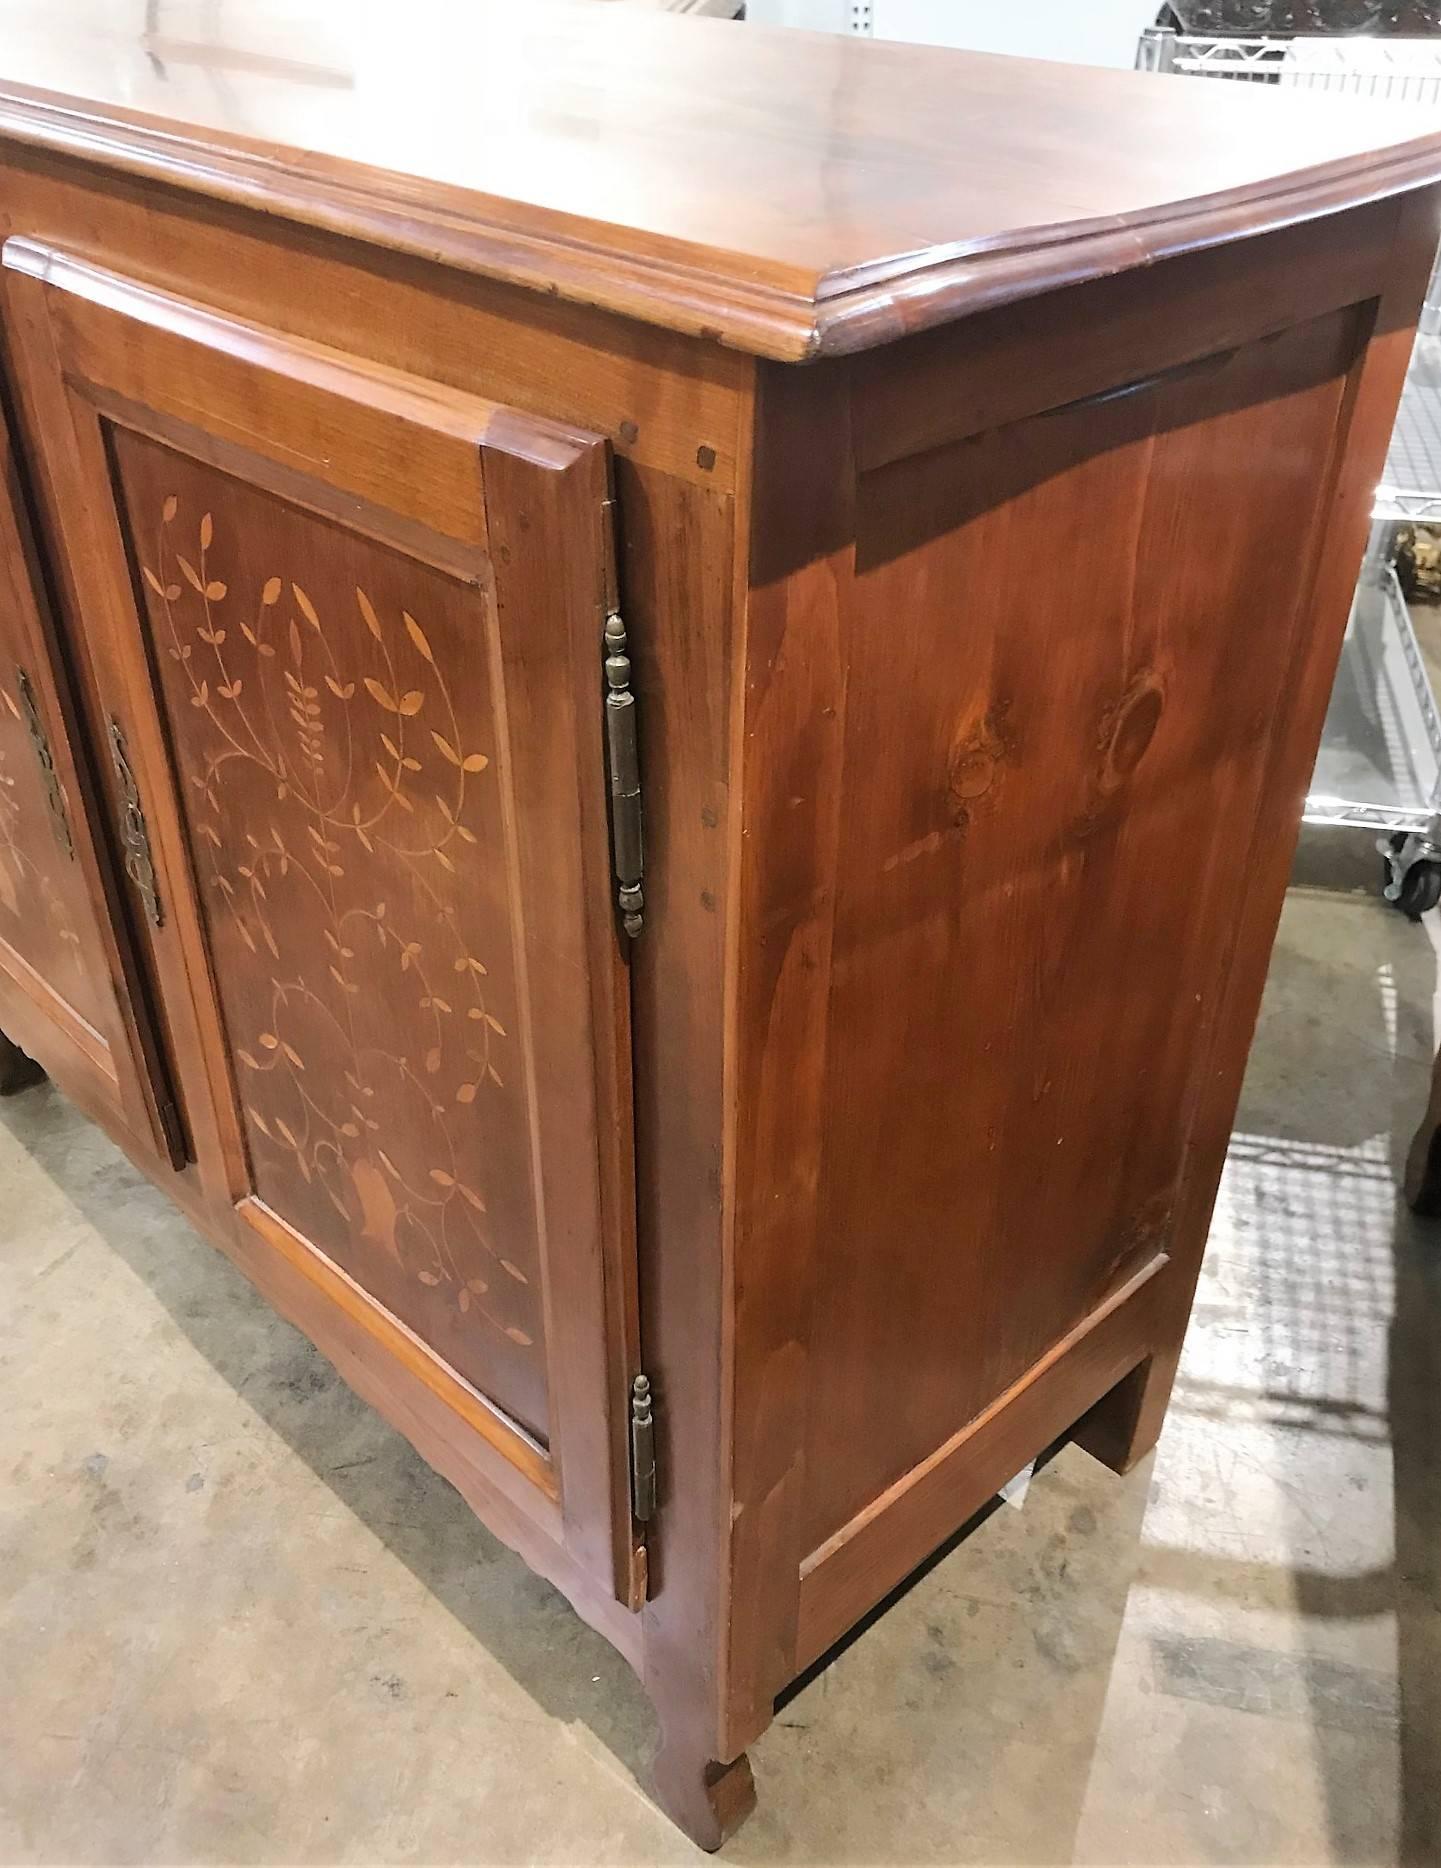 Finely crafted custom-made pair of French Provincial style cherrywood servers or buffets. The cupboard doors expertly inlaid with satinwood and done in a leaf spray motif.

Each with a shaped and carved skirt and retains the original hand-wrought